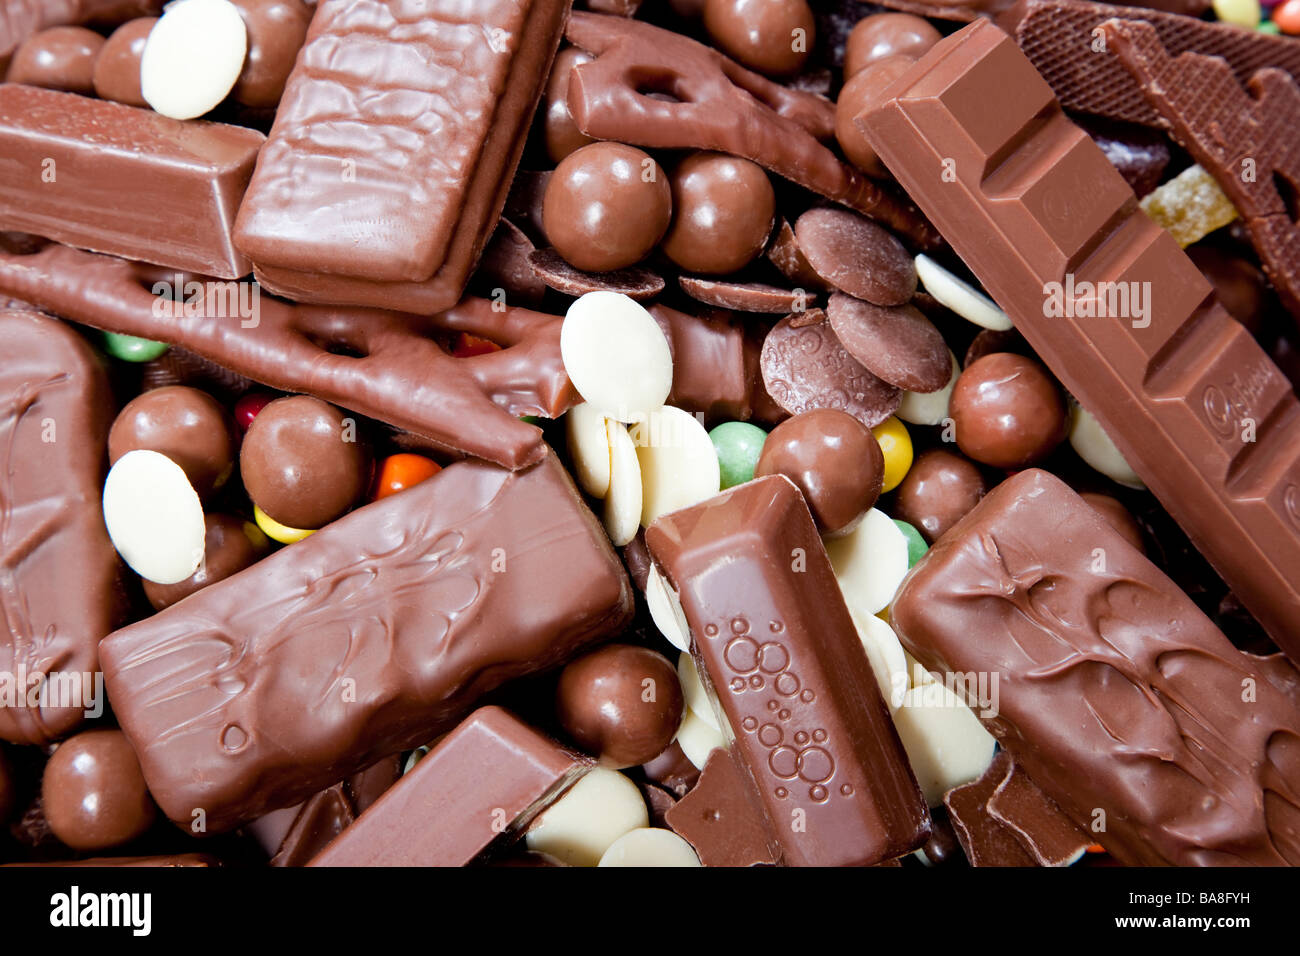 Assorted sweets and chocolate bars. Stock Photo